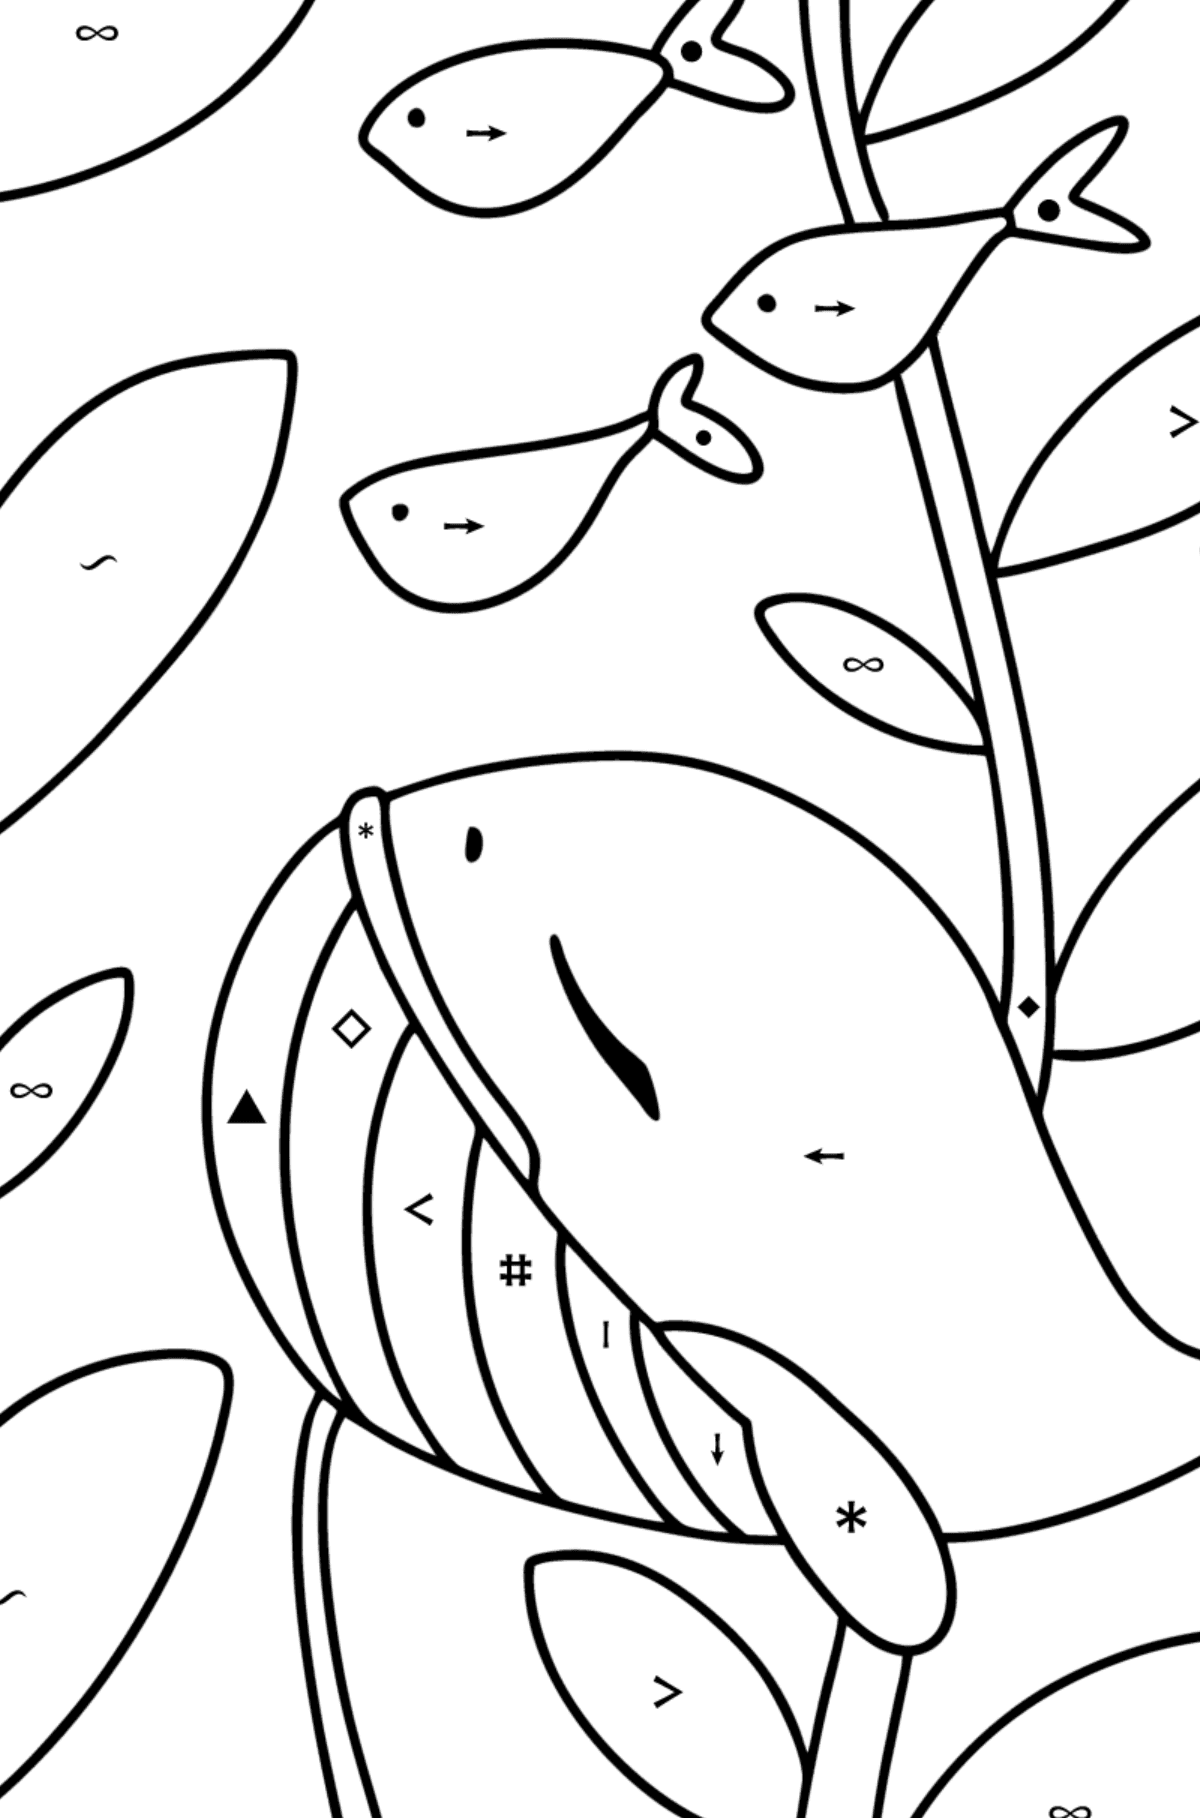 Whale baby coloring page - Coloring by Symbols for Kids